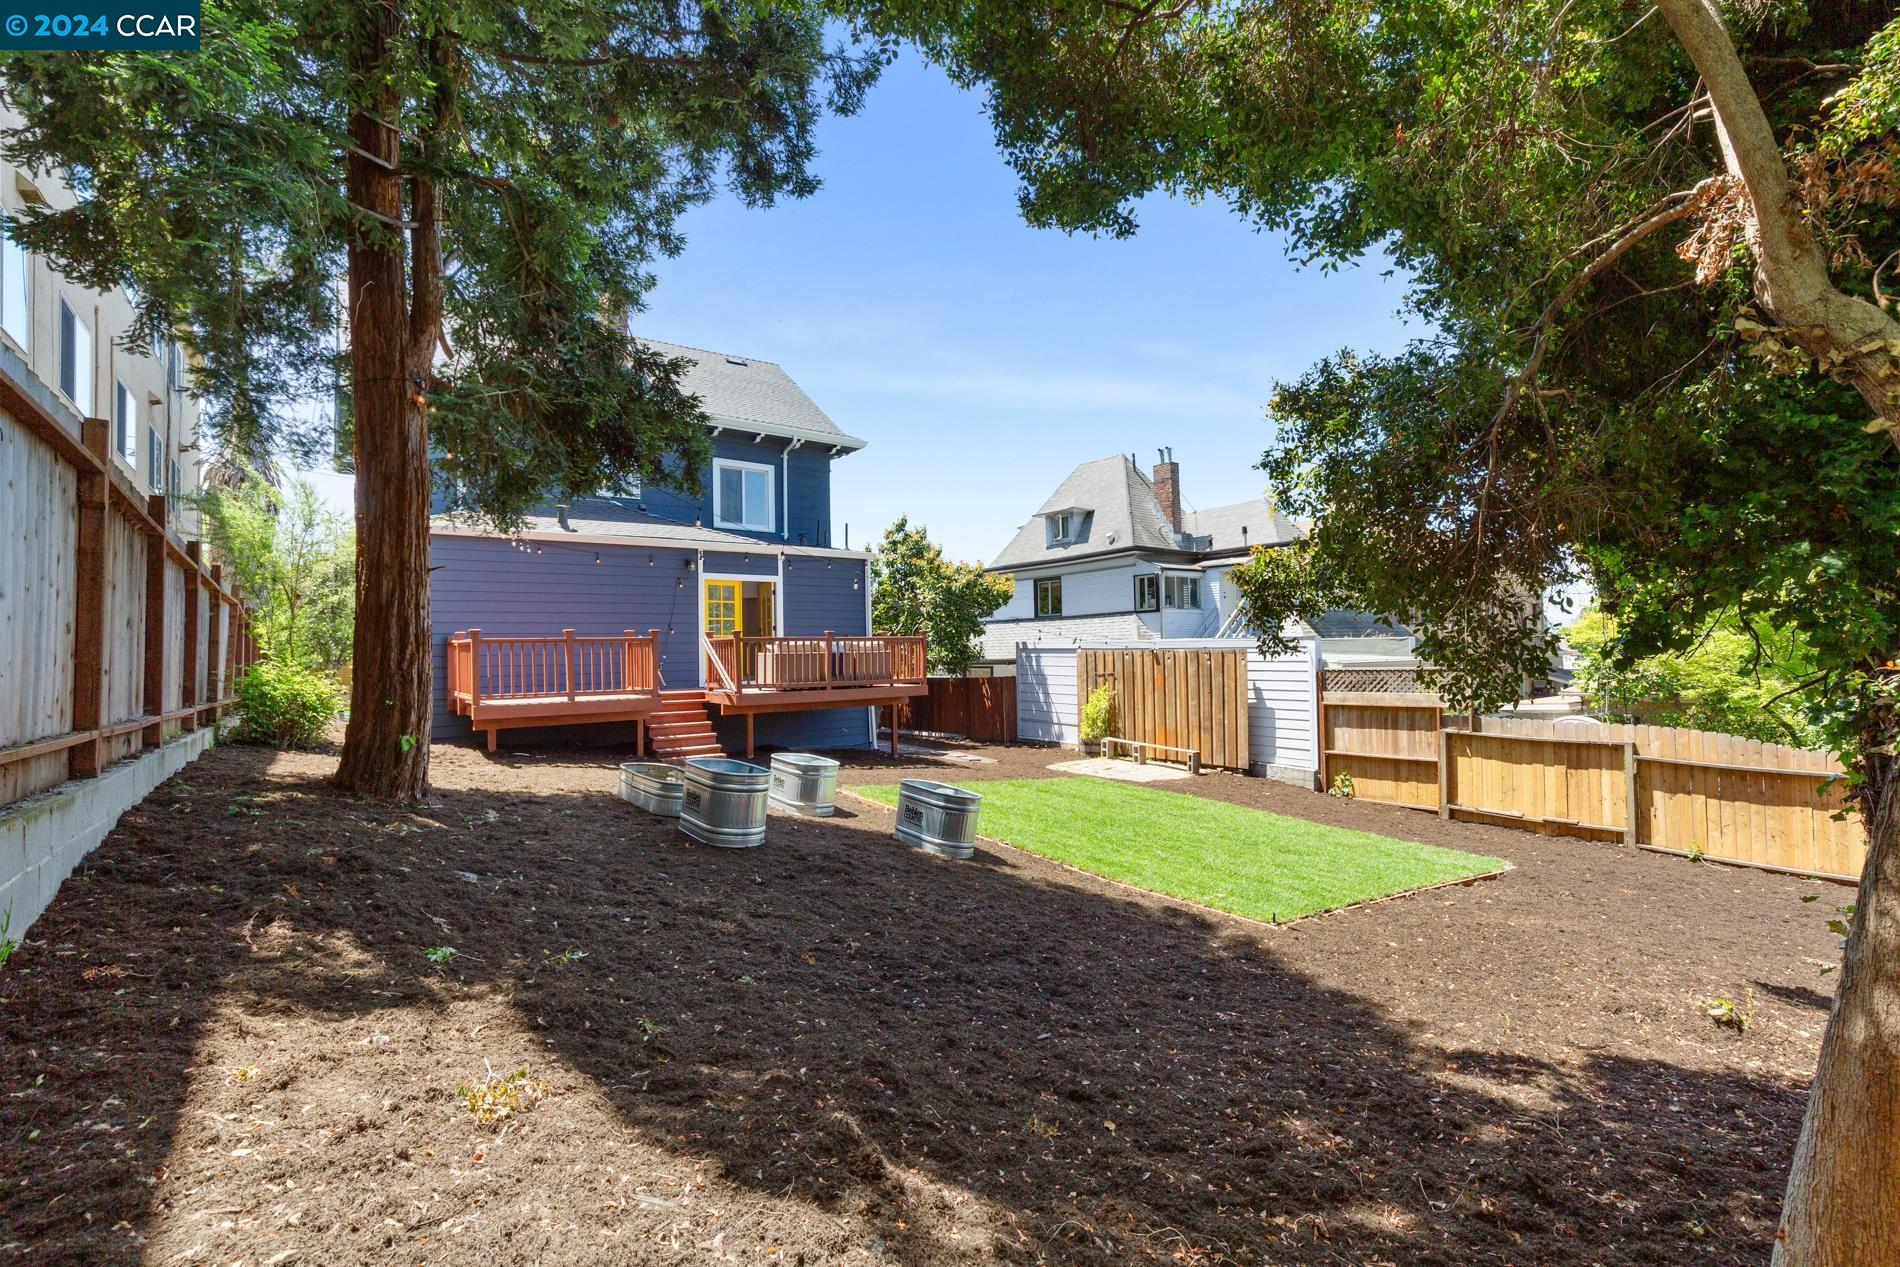 134 Moss Ave, Oakland, CA 94611 Listing Photo  41